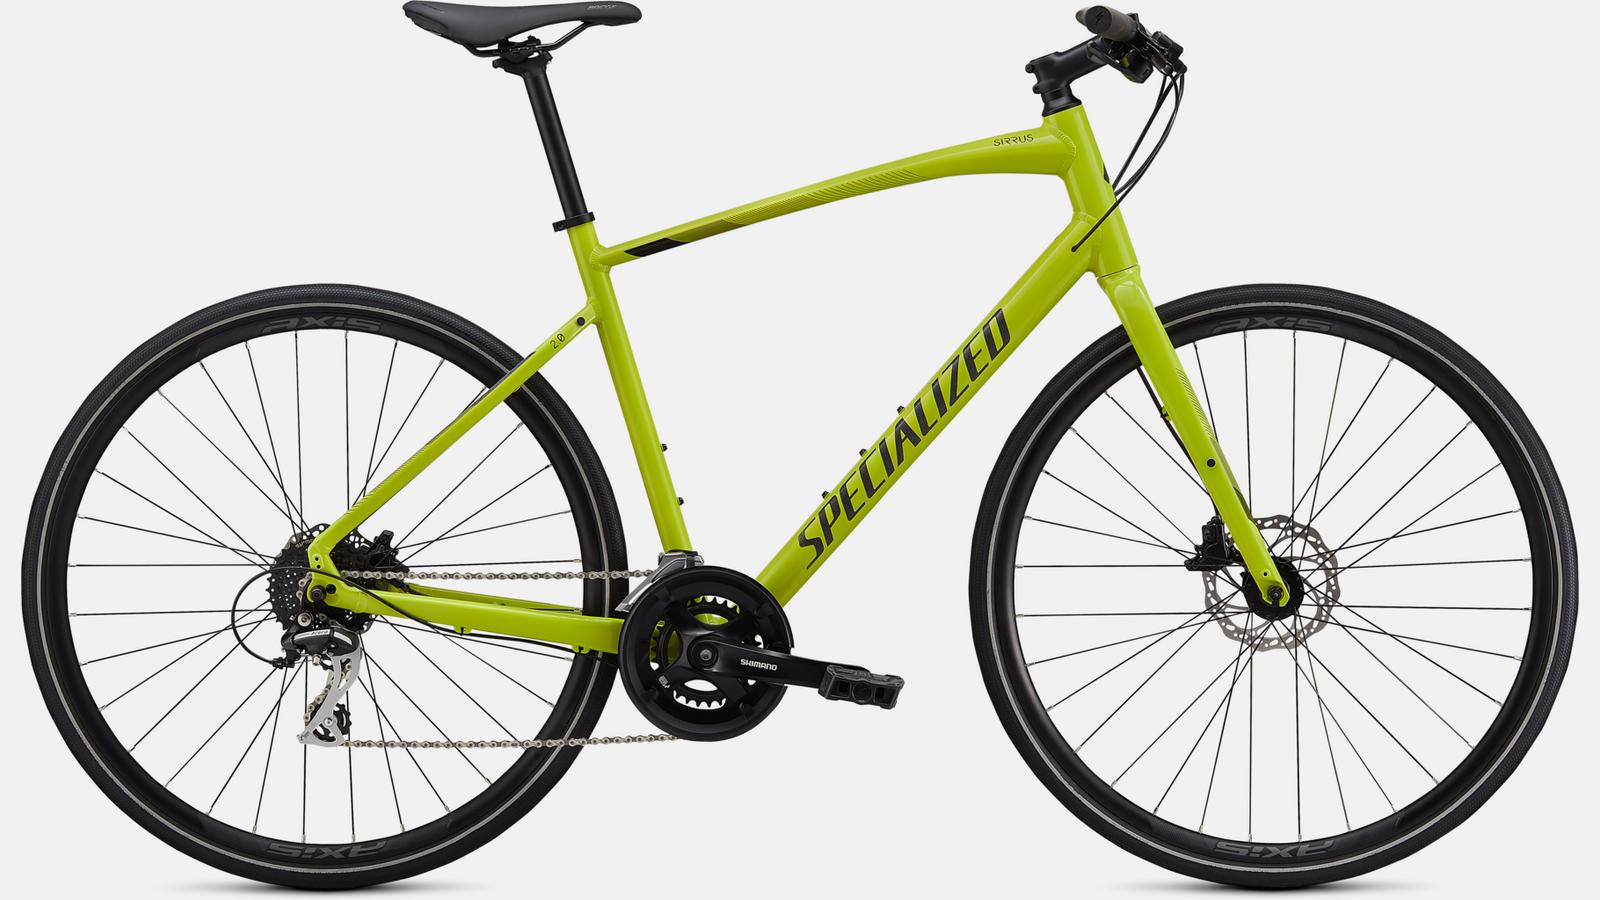 Paint for 2021 Specialized Sirrus 2.0 - Gloss Hyper Green